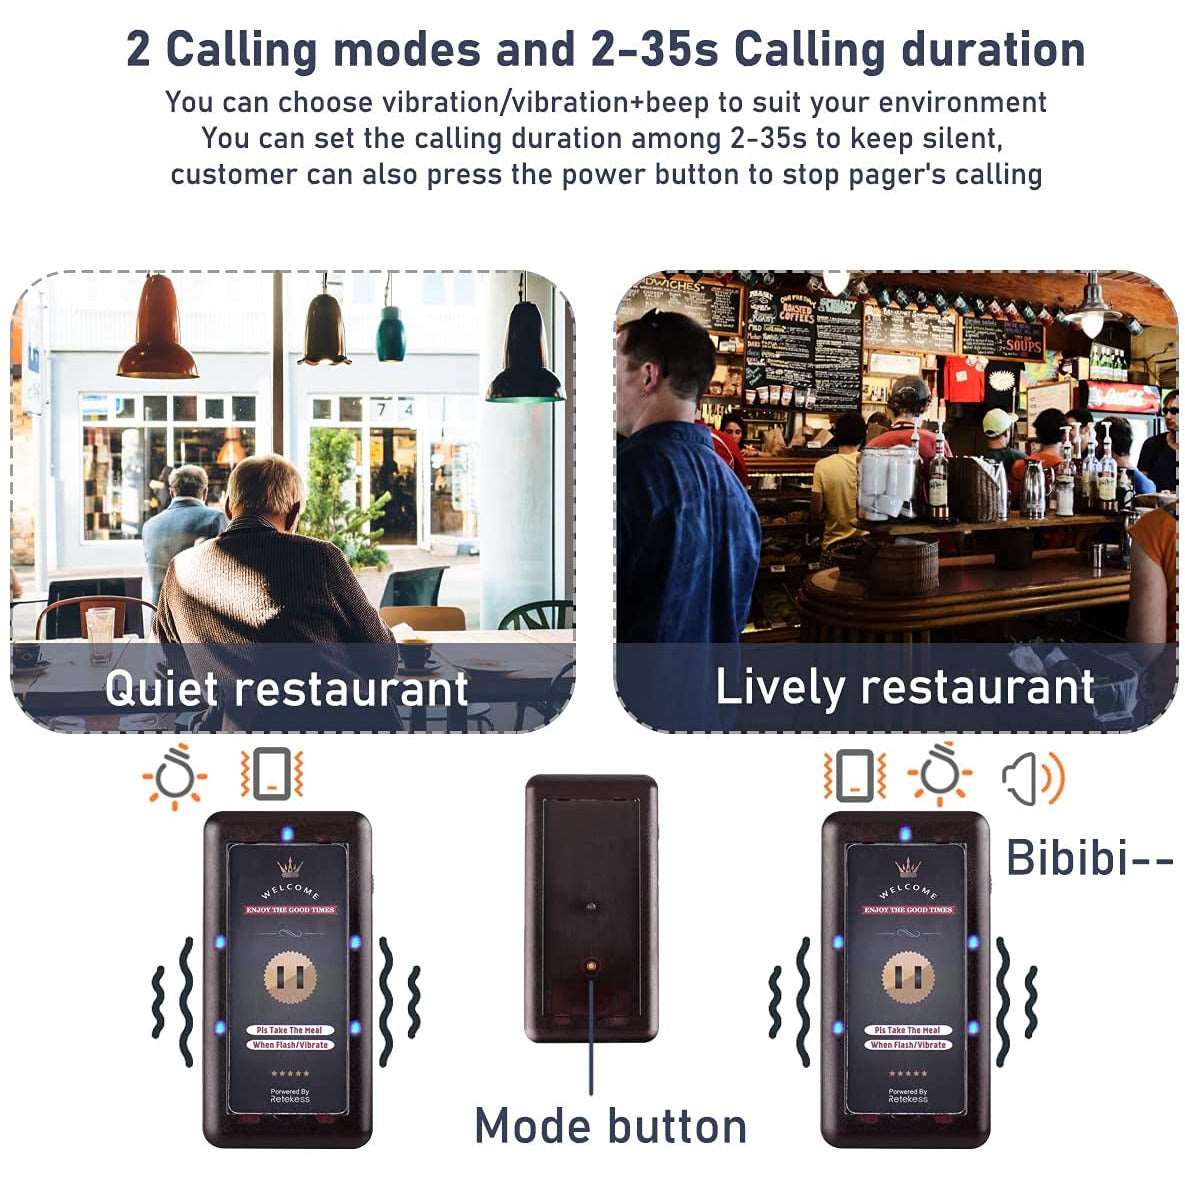 Retekess T115 Restaurant Pager System Buzzers Beepers Restaurant Calling System Waterproof Touch Keypad 18 Beepers